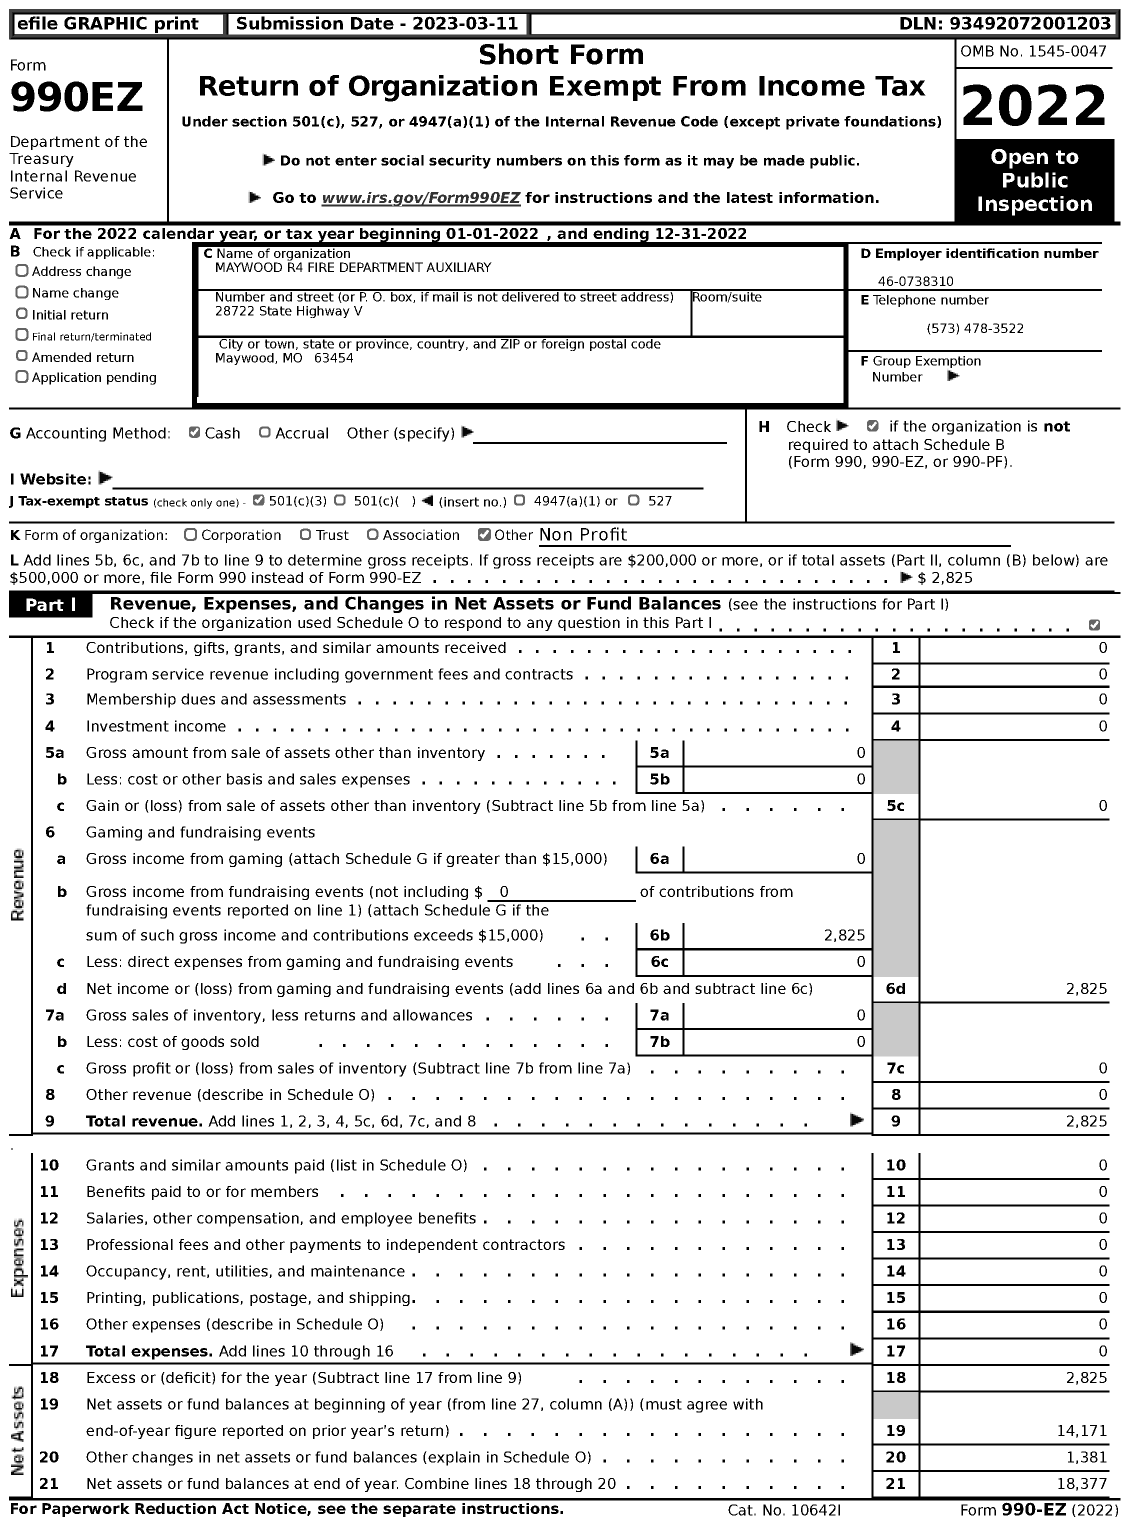 Image of first page of 2022 Form 990EZ for Maywood R4 Fire Department Auxiliary